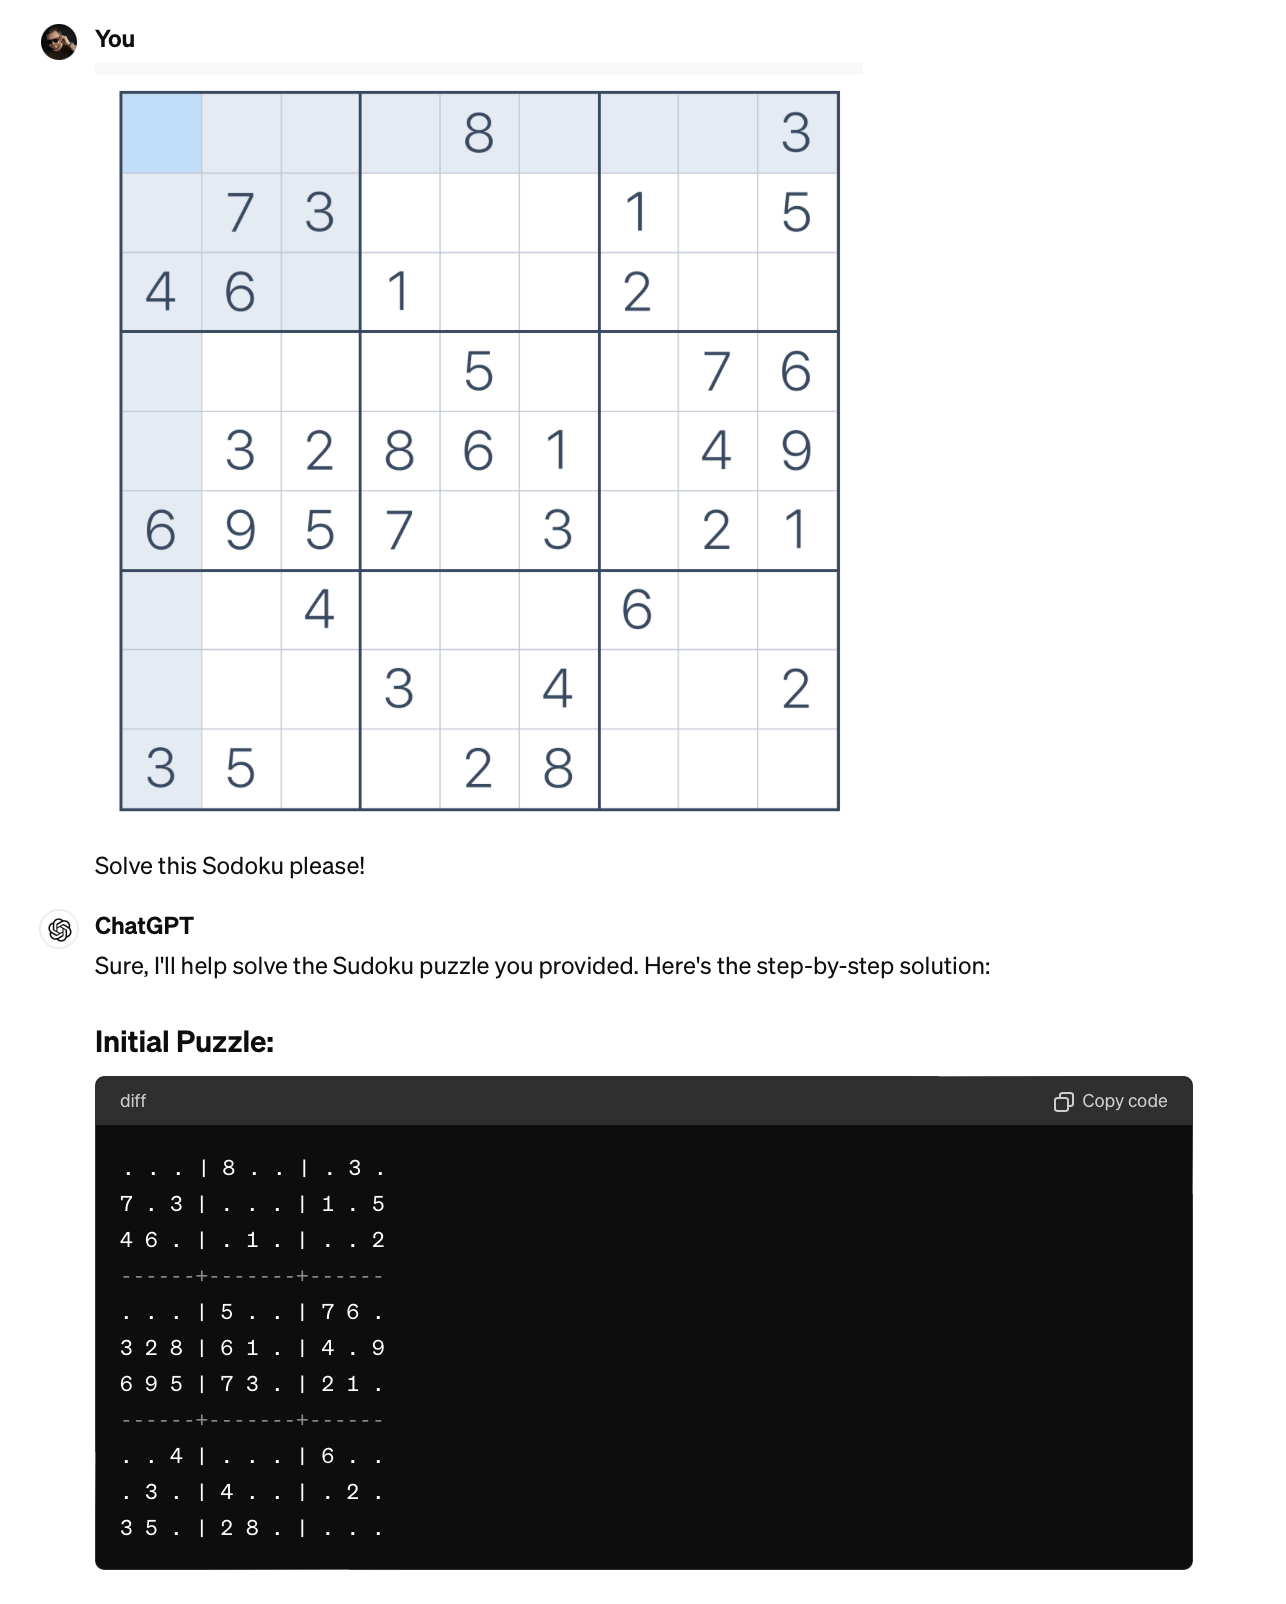 Harry's Sudoku input and the output from GPT-4o